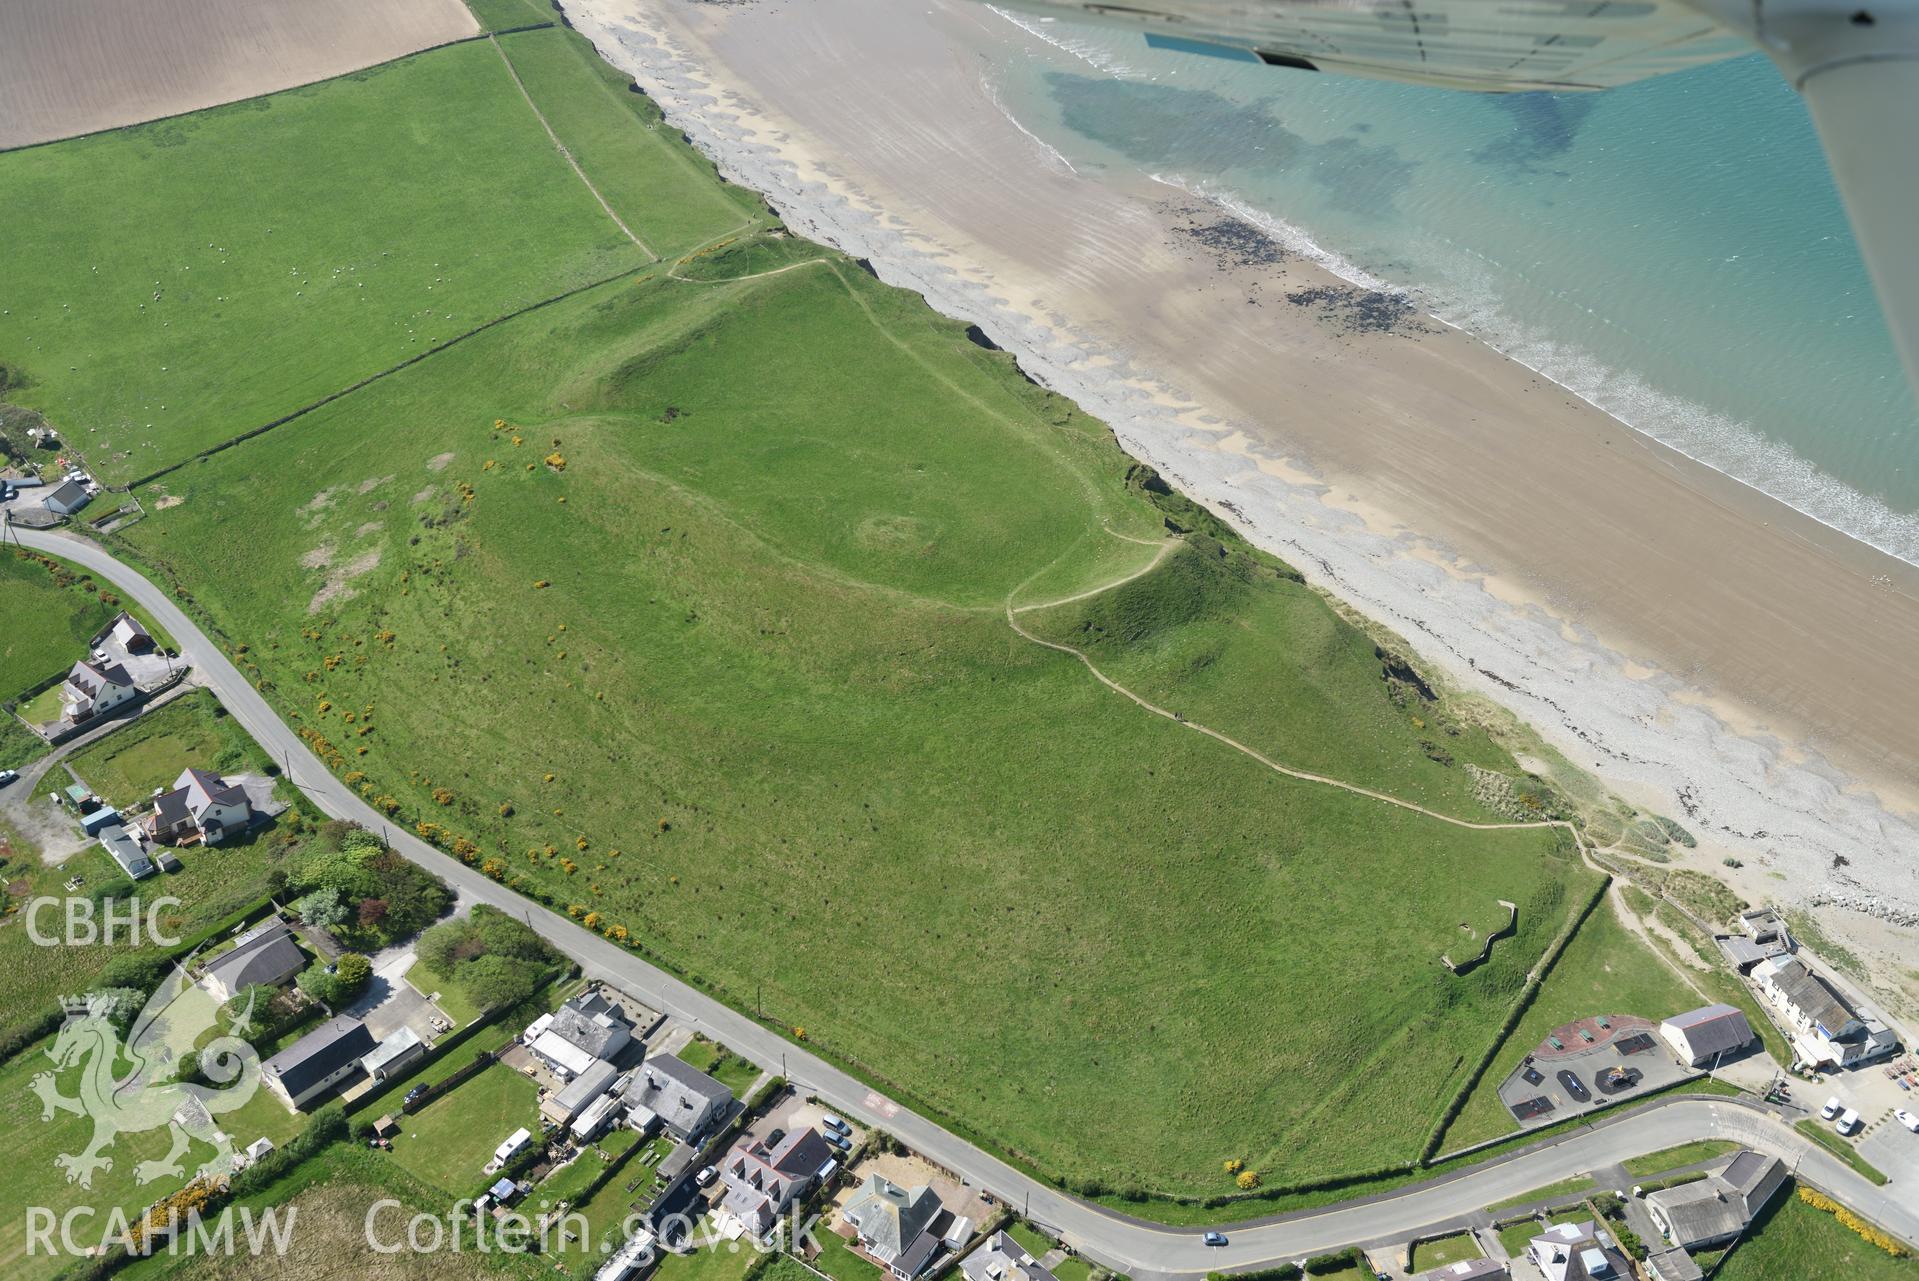 Aerial photography of Dinas Dinlle taken on 3rd May 2017.  Baseline aerial reconnaissance survey for the CHERISH Project. ? Crown: CHERISH PROJECT 2017. Produced with EU funds through the Ireland Wales Co-operation Programme 2014-2020. All material made